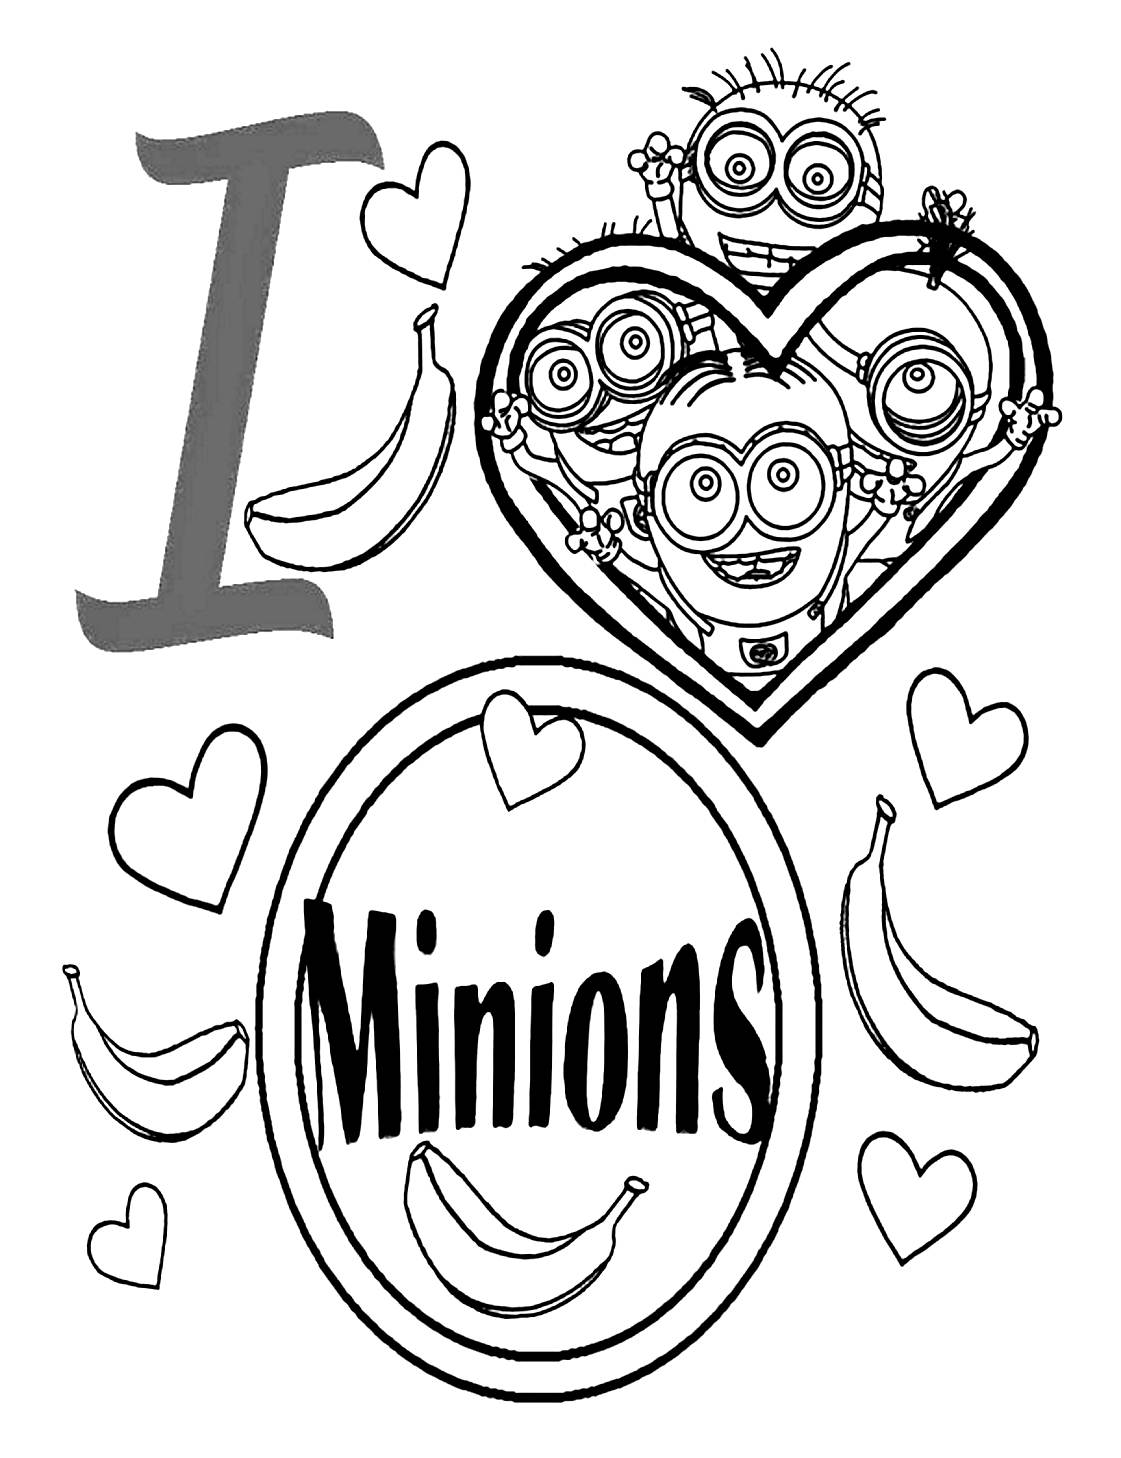 Easy Minions coloring pages for kids